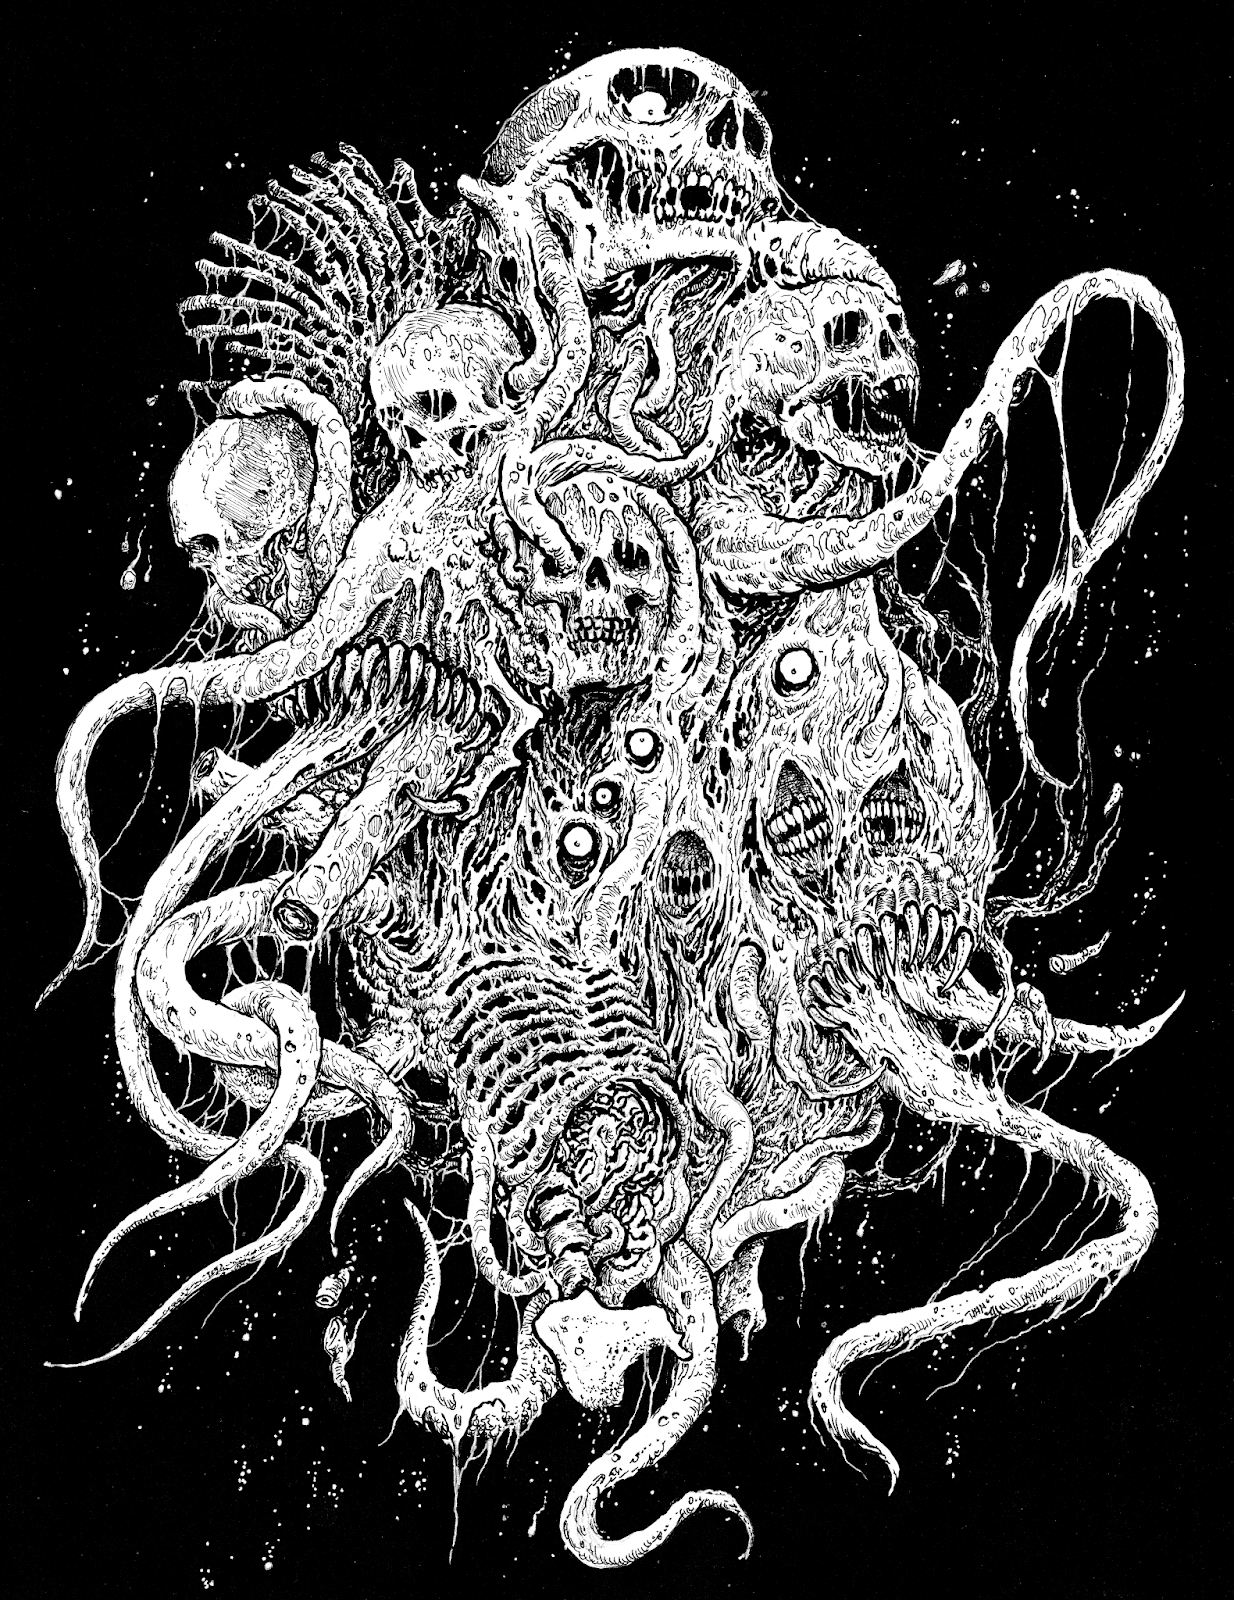 The Lair of Filth: Artist Profile with Mark Riddick - Riddickart.